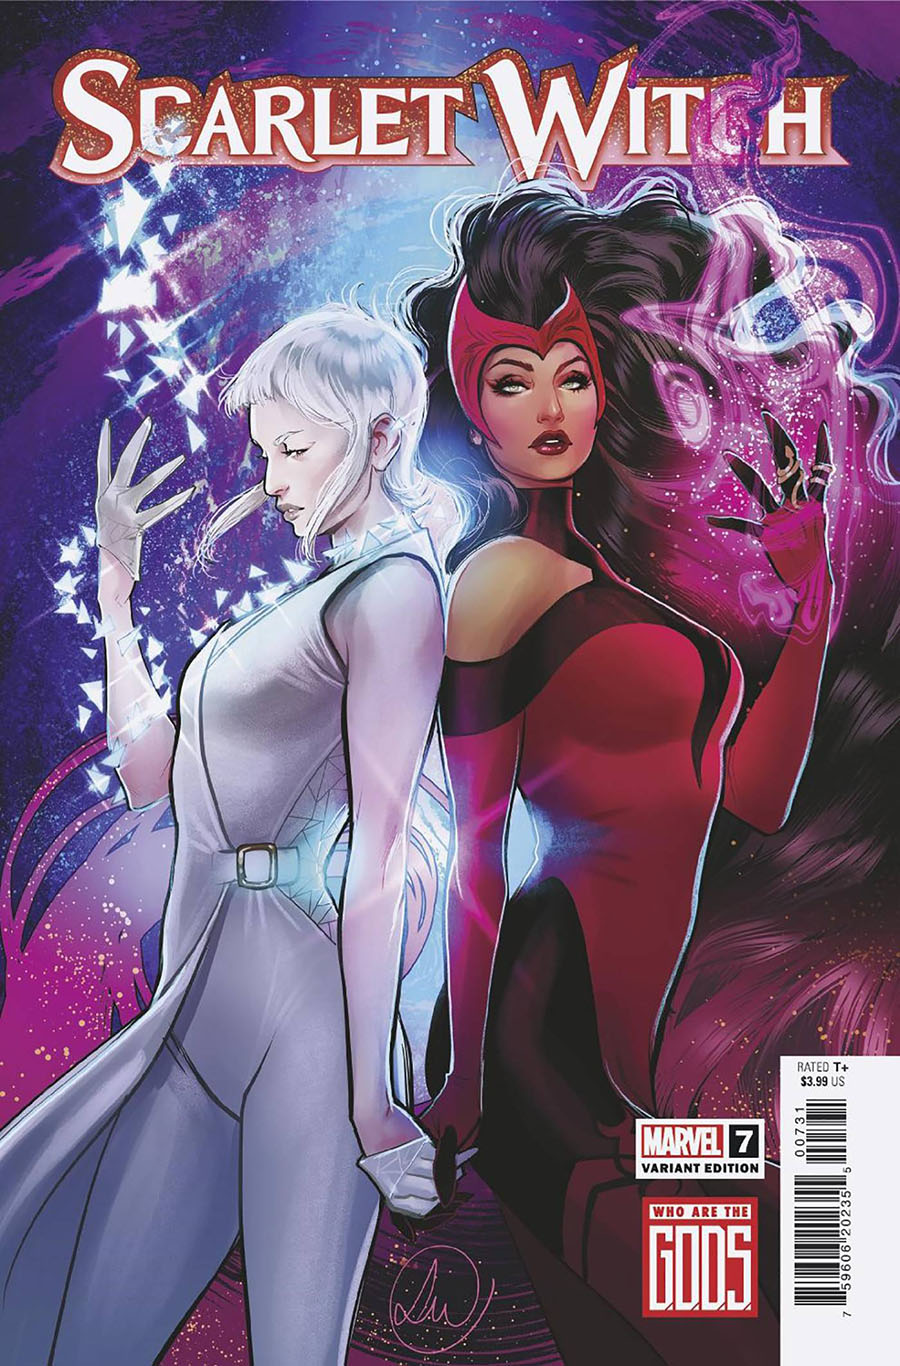 Scarlet Witch Vol 3 #7 Cover C Variant Lucas Werneck G.O.D.S. Cover (G.O.D.S. Tie-In)